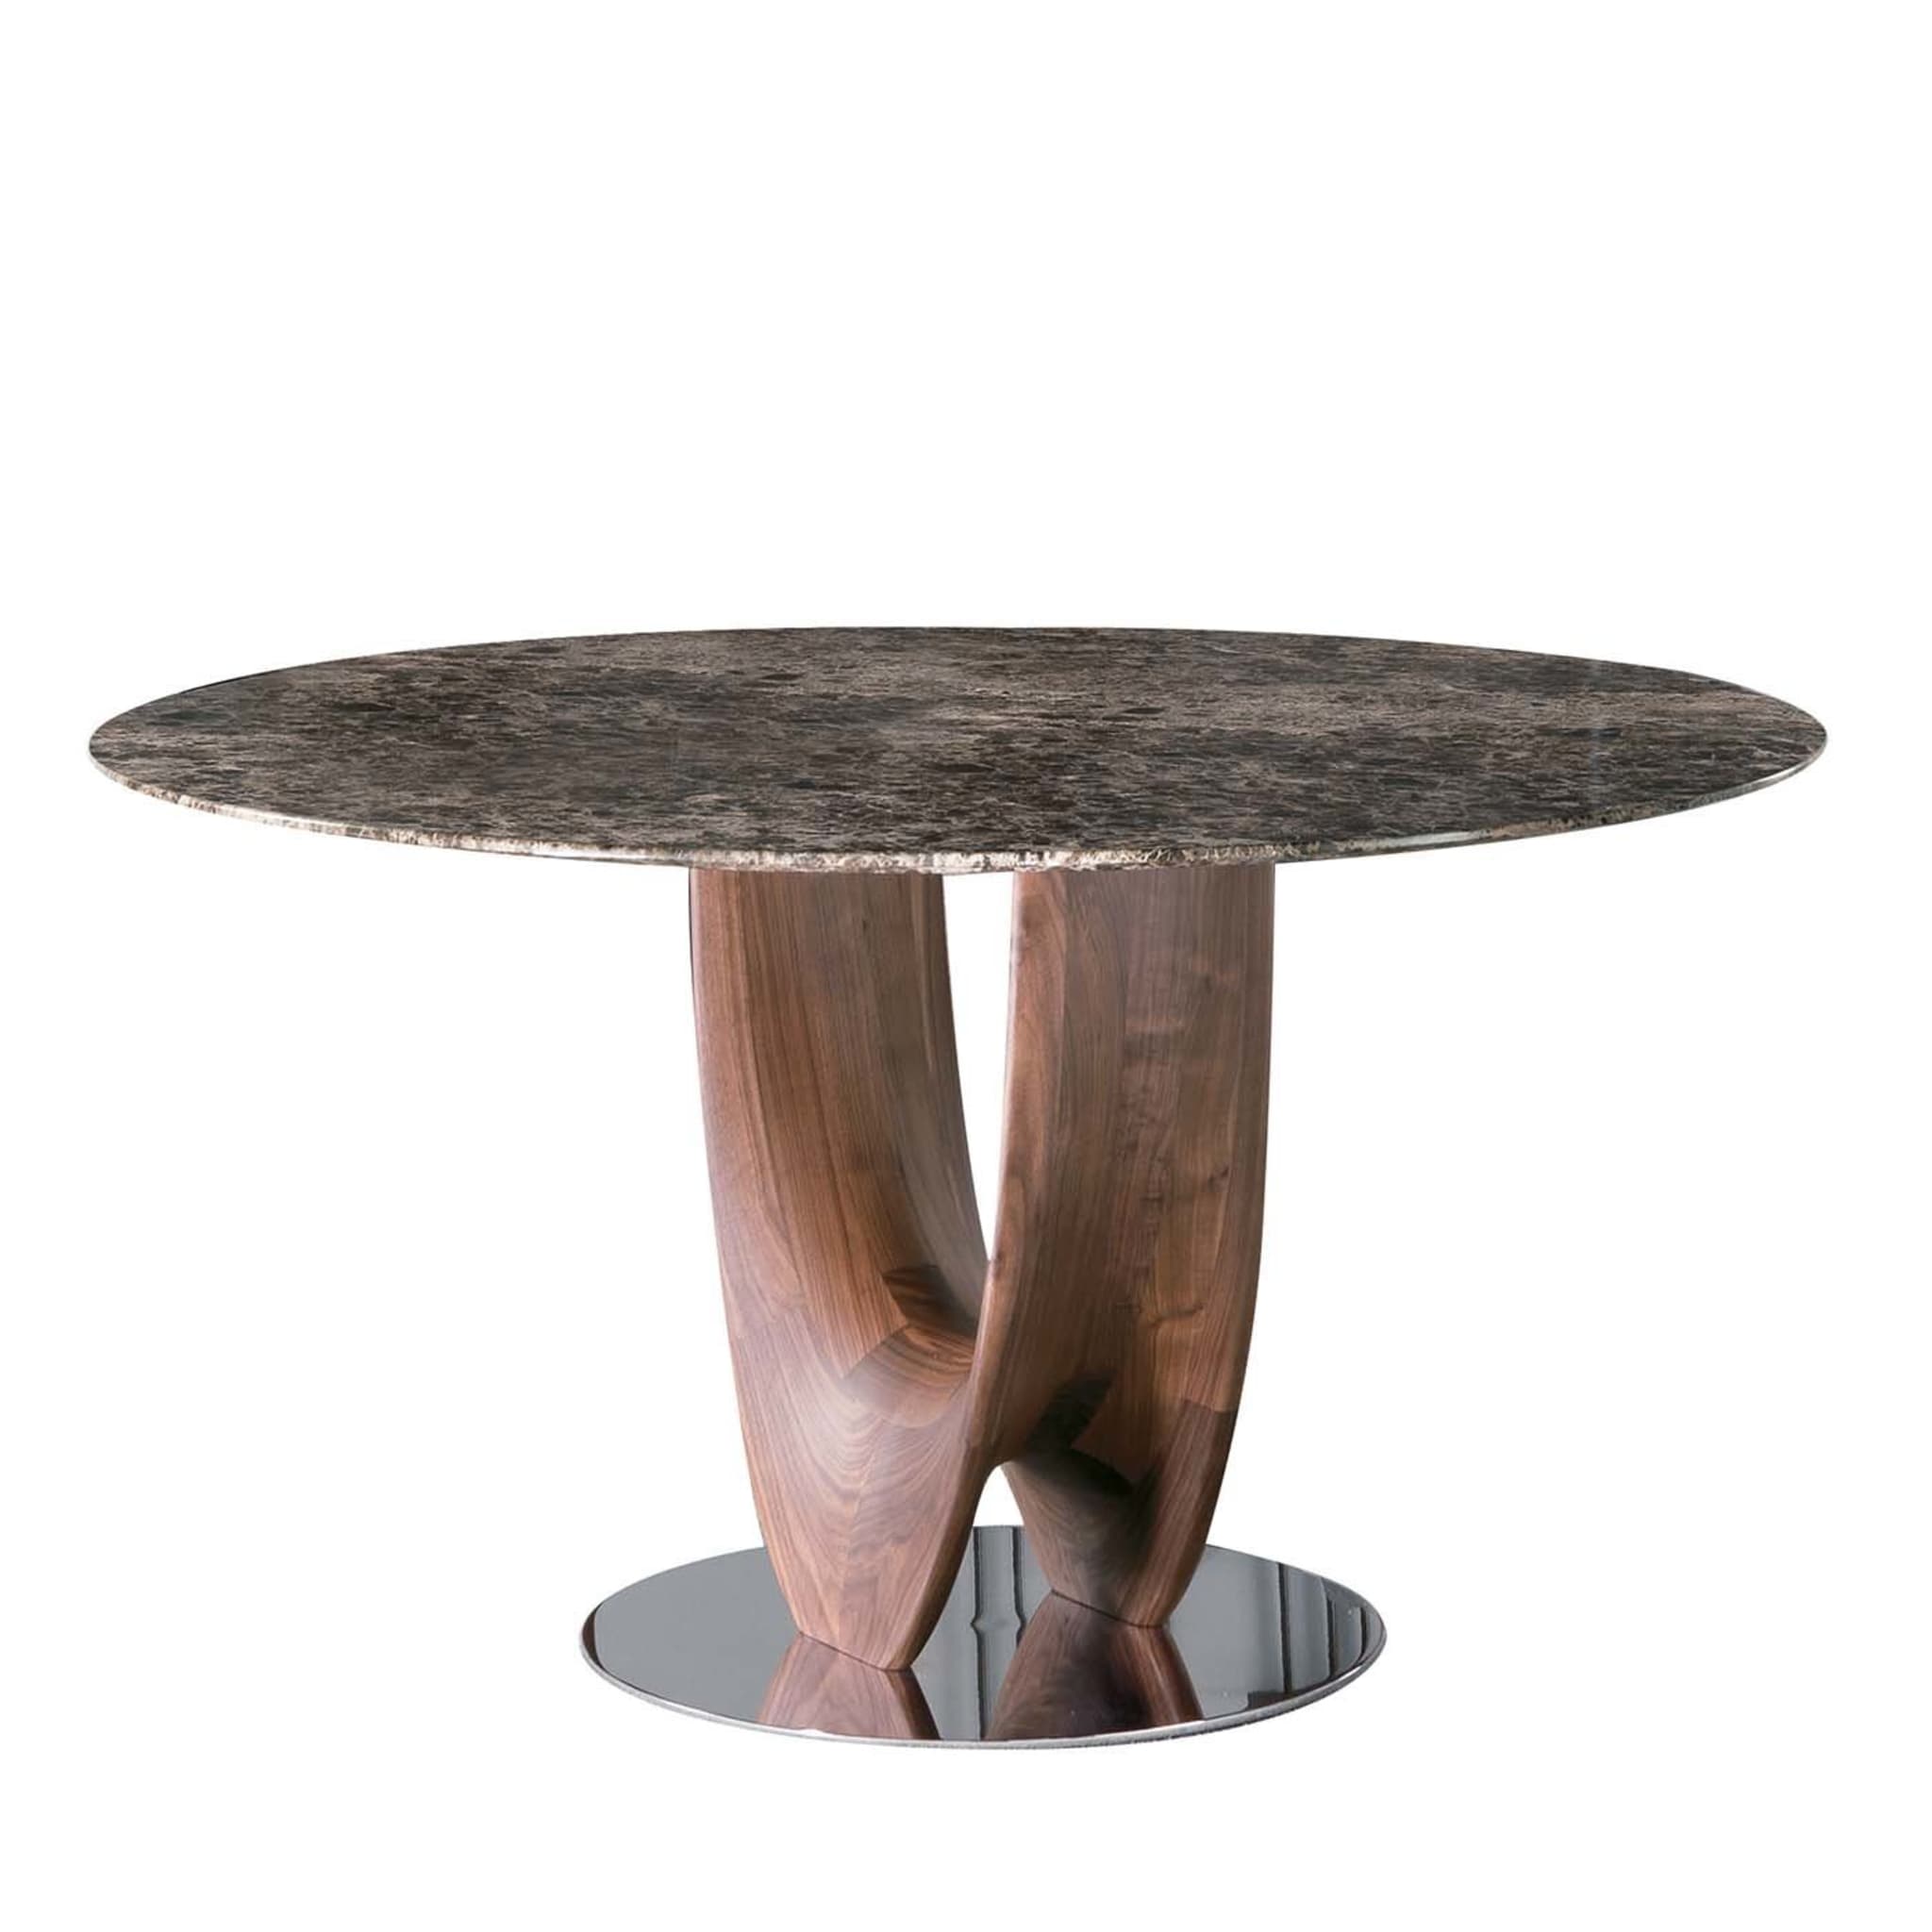 Axis Round Small Table with Marble Top by Stefano Bigi - Main view